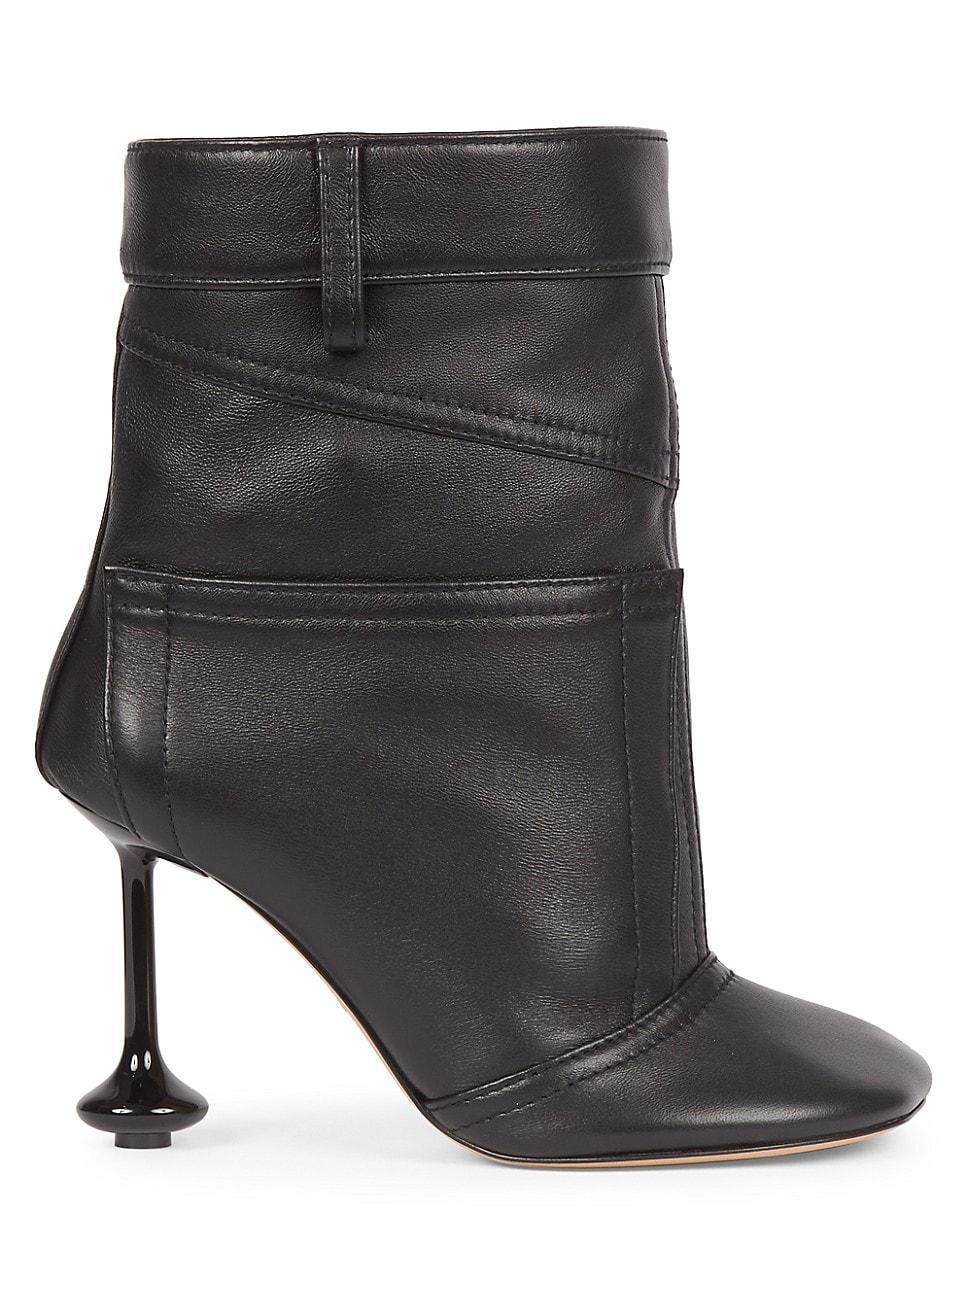 Loewe - Toy 90 Leather Ankle Boots - Womens - Black Product Image